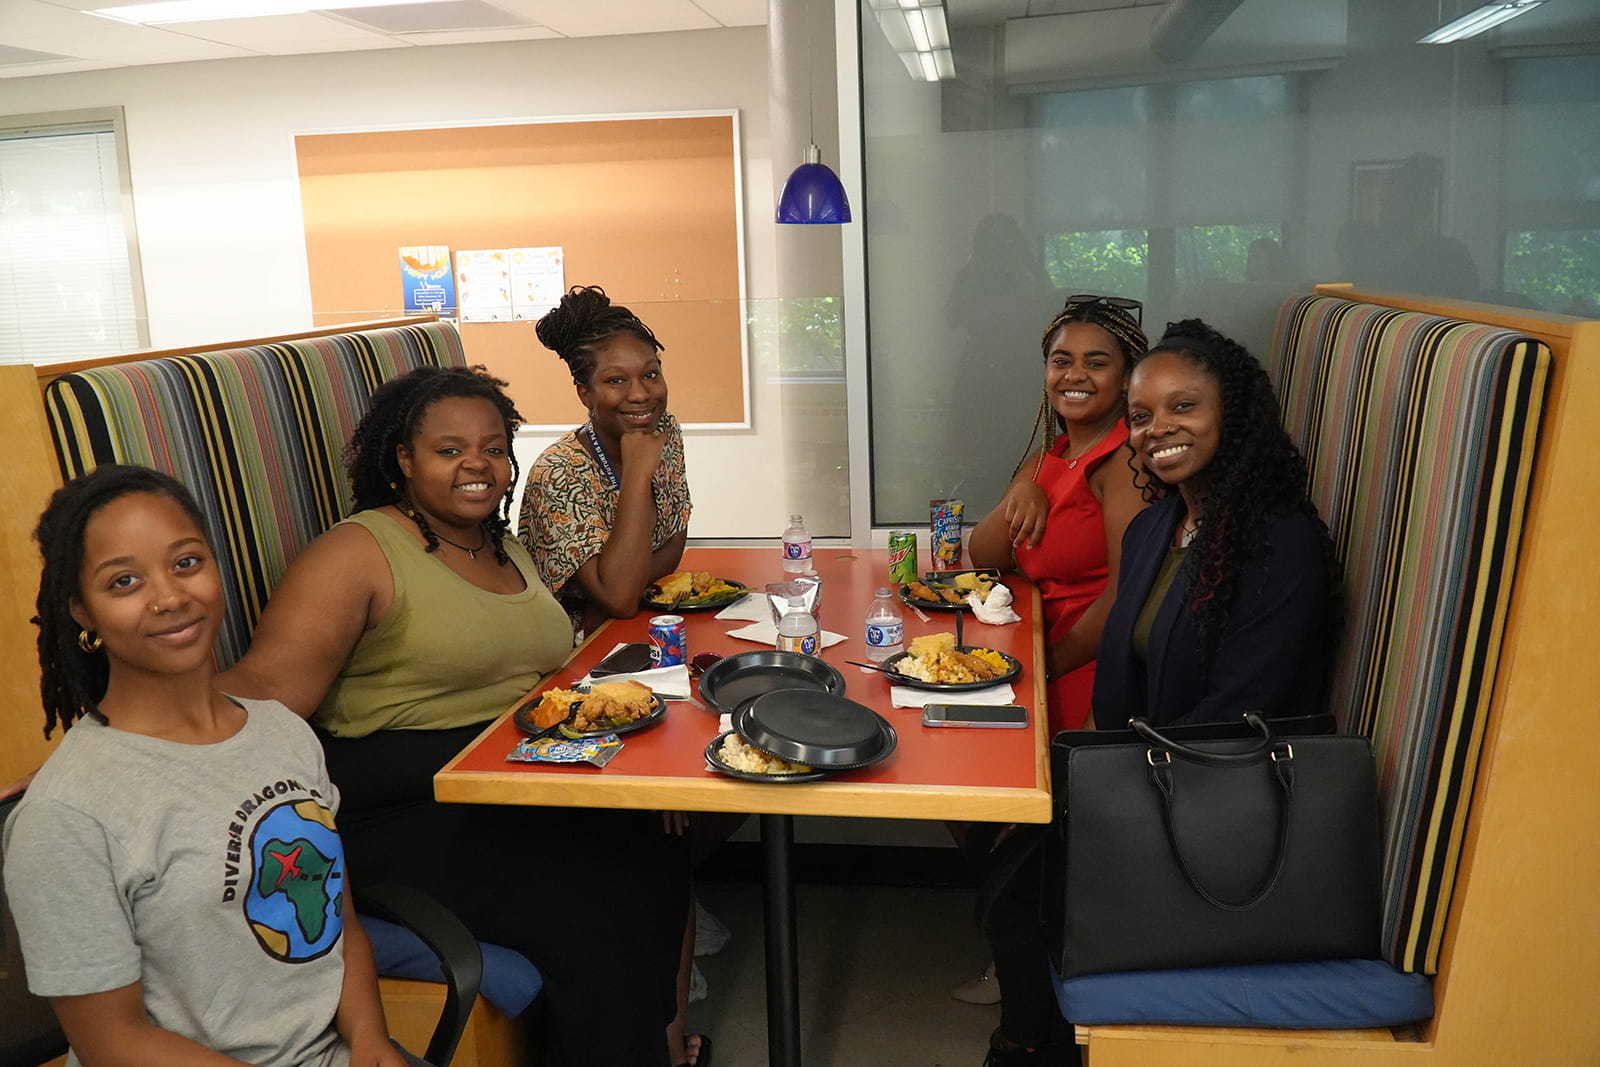 Dragons enjoying the food at a table inside the Center for Black Culture.